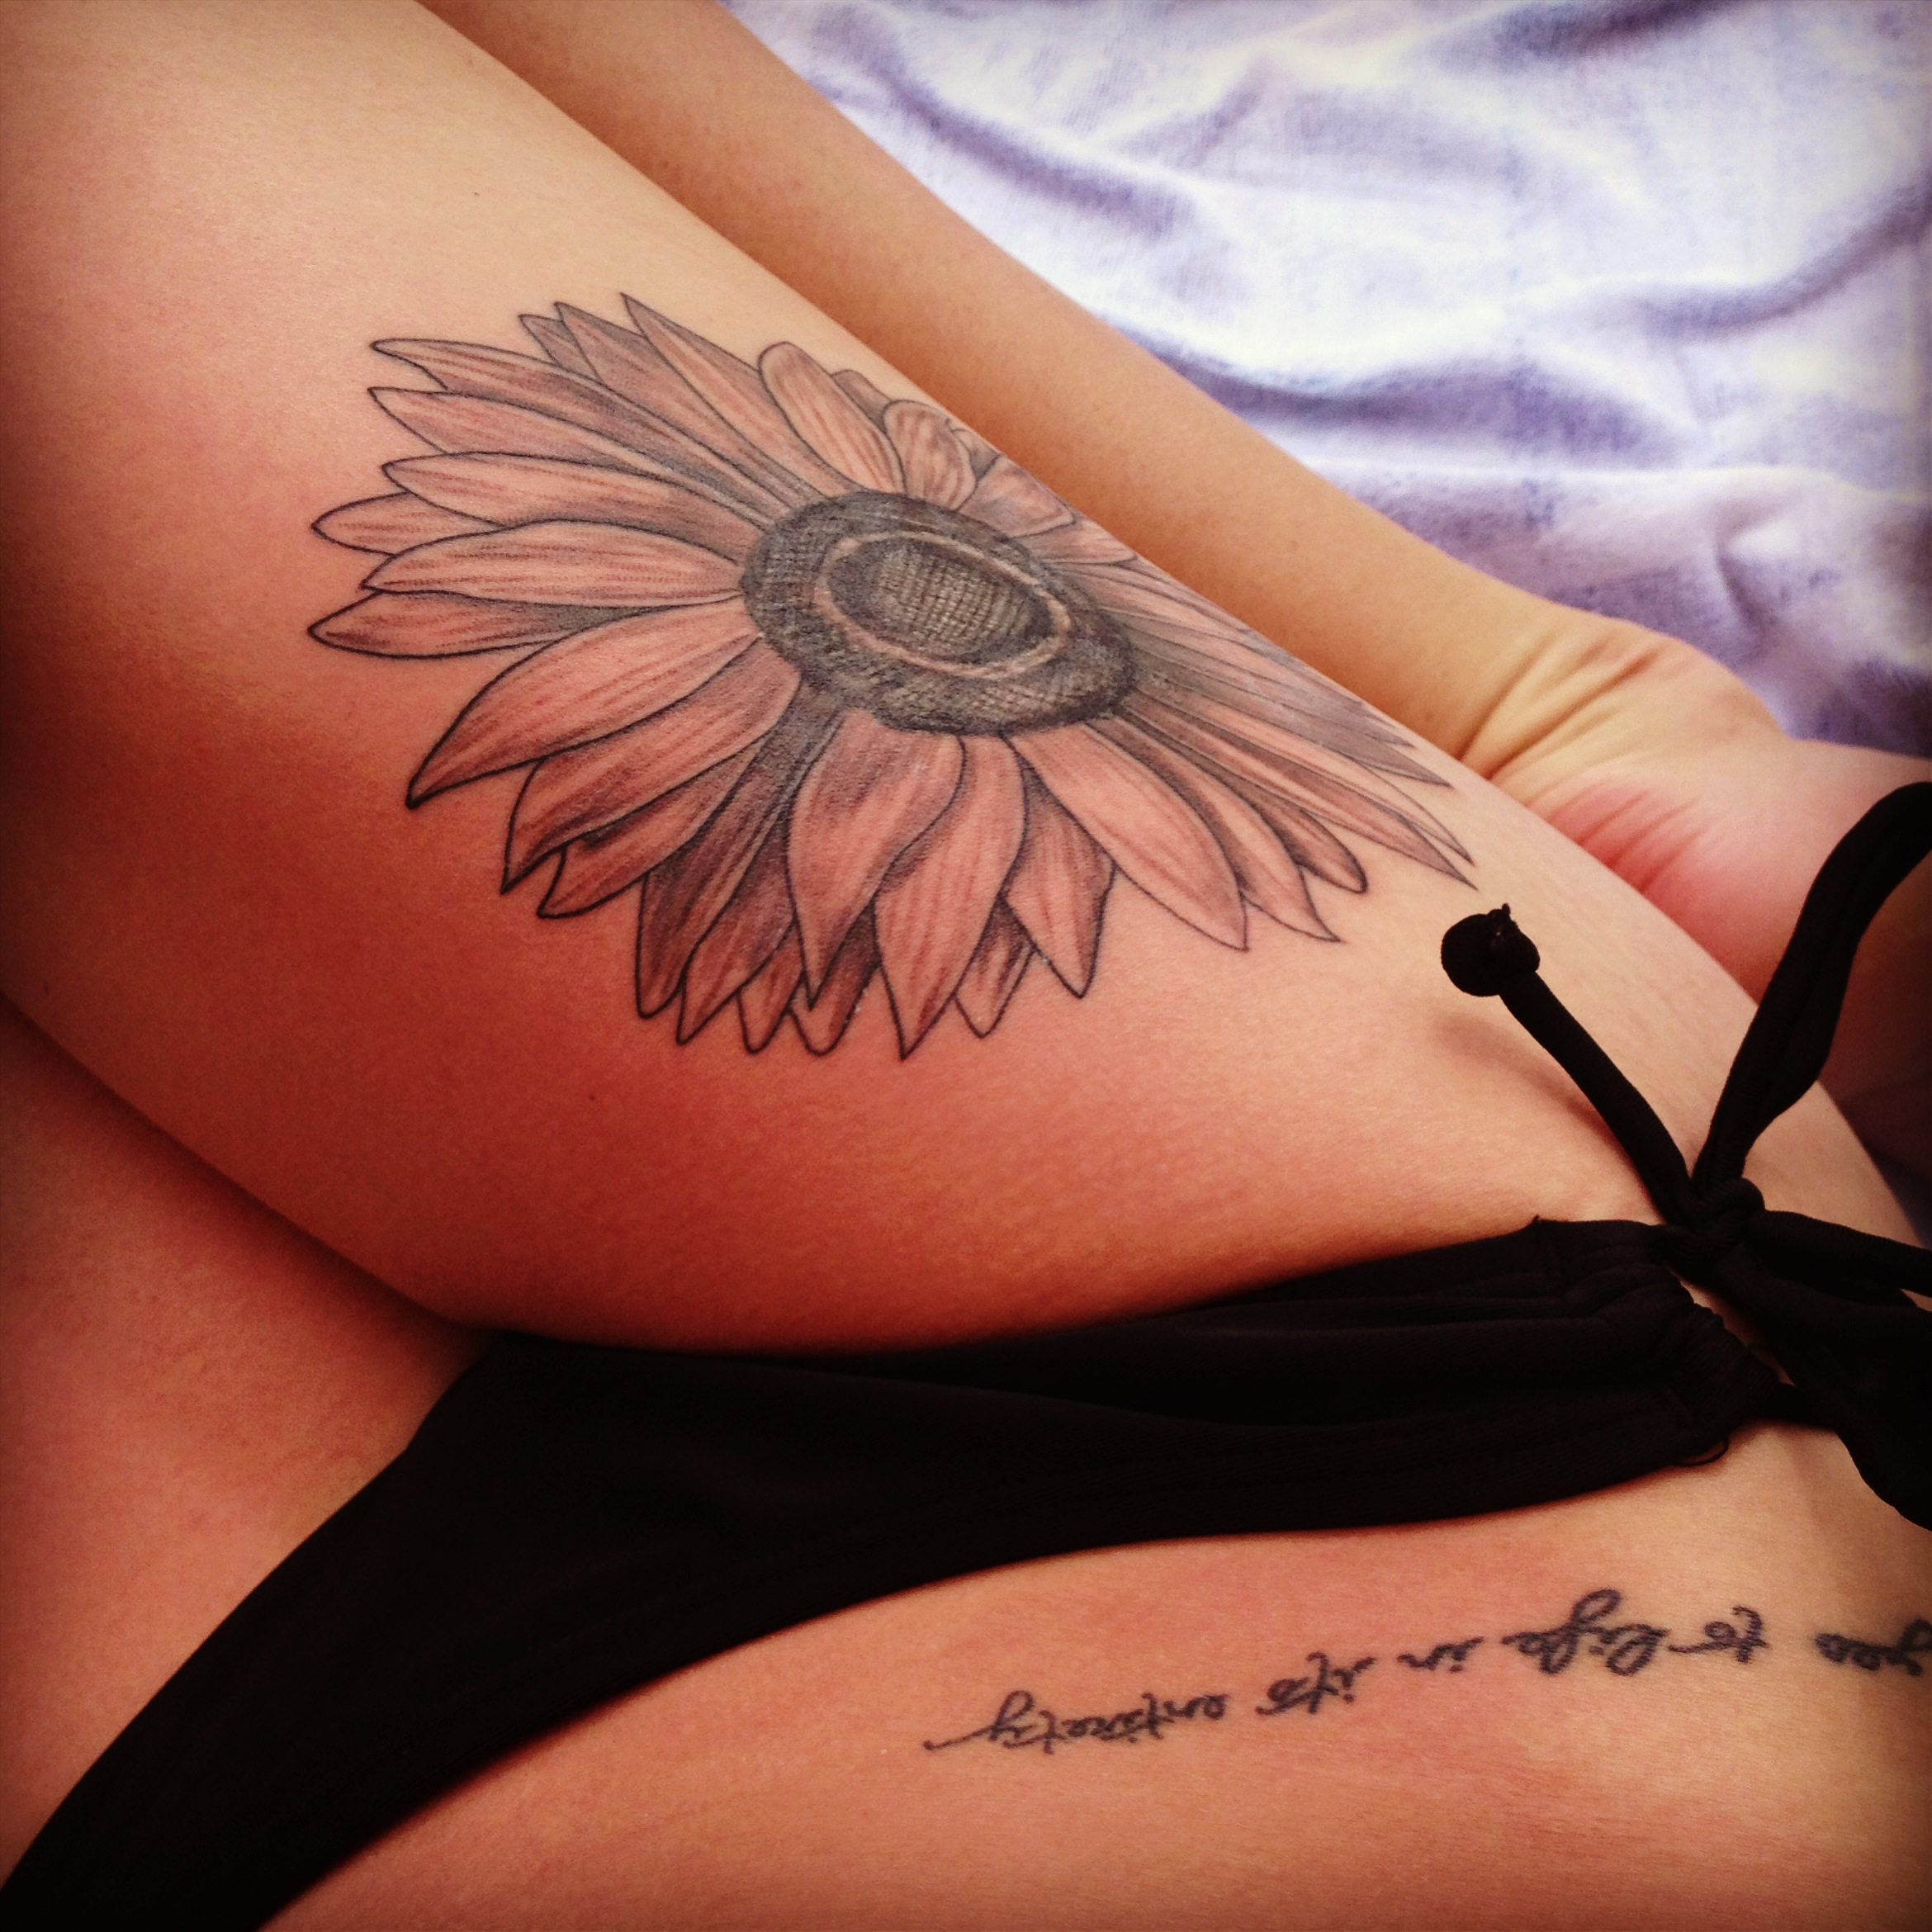 Sunflower Tattoos Designs, Ideas and Meaning  Tattoos For You